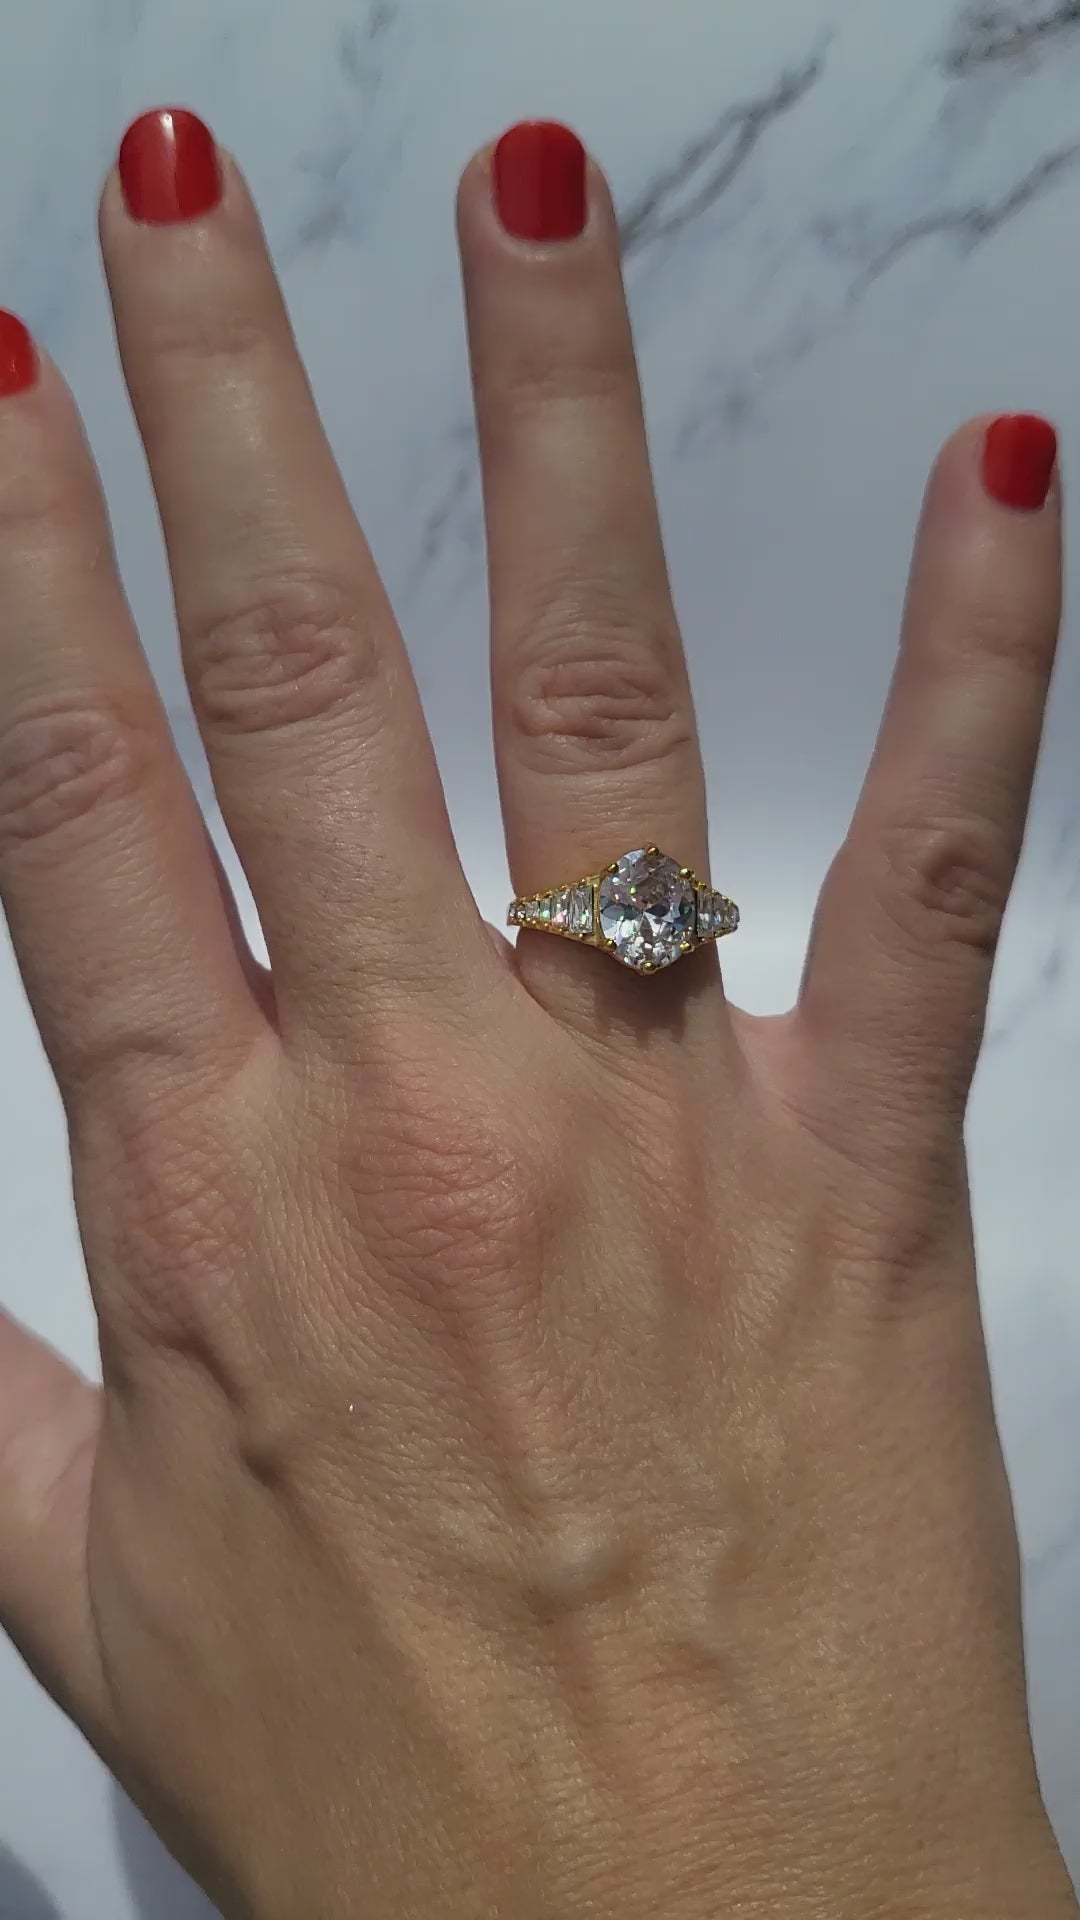 Video of gold plated ring with big zircons